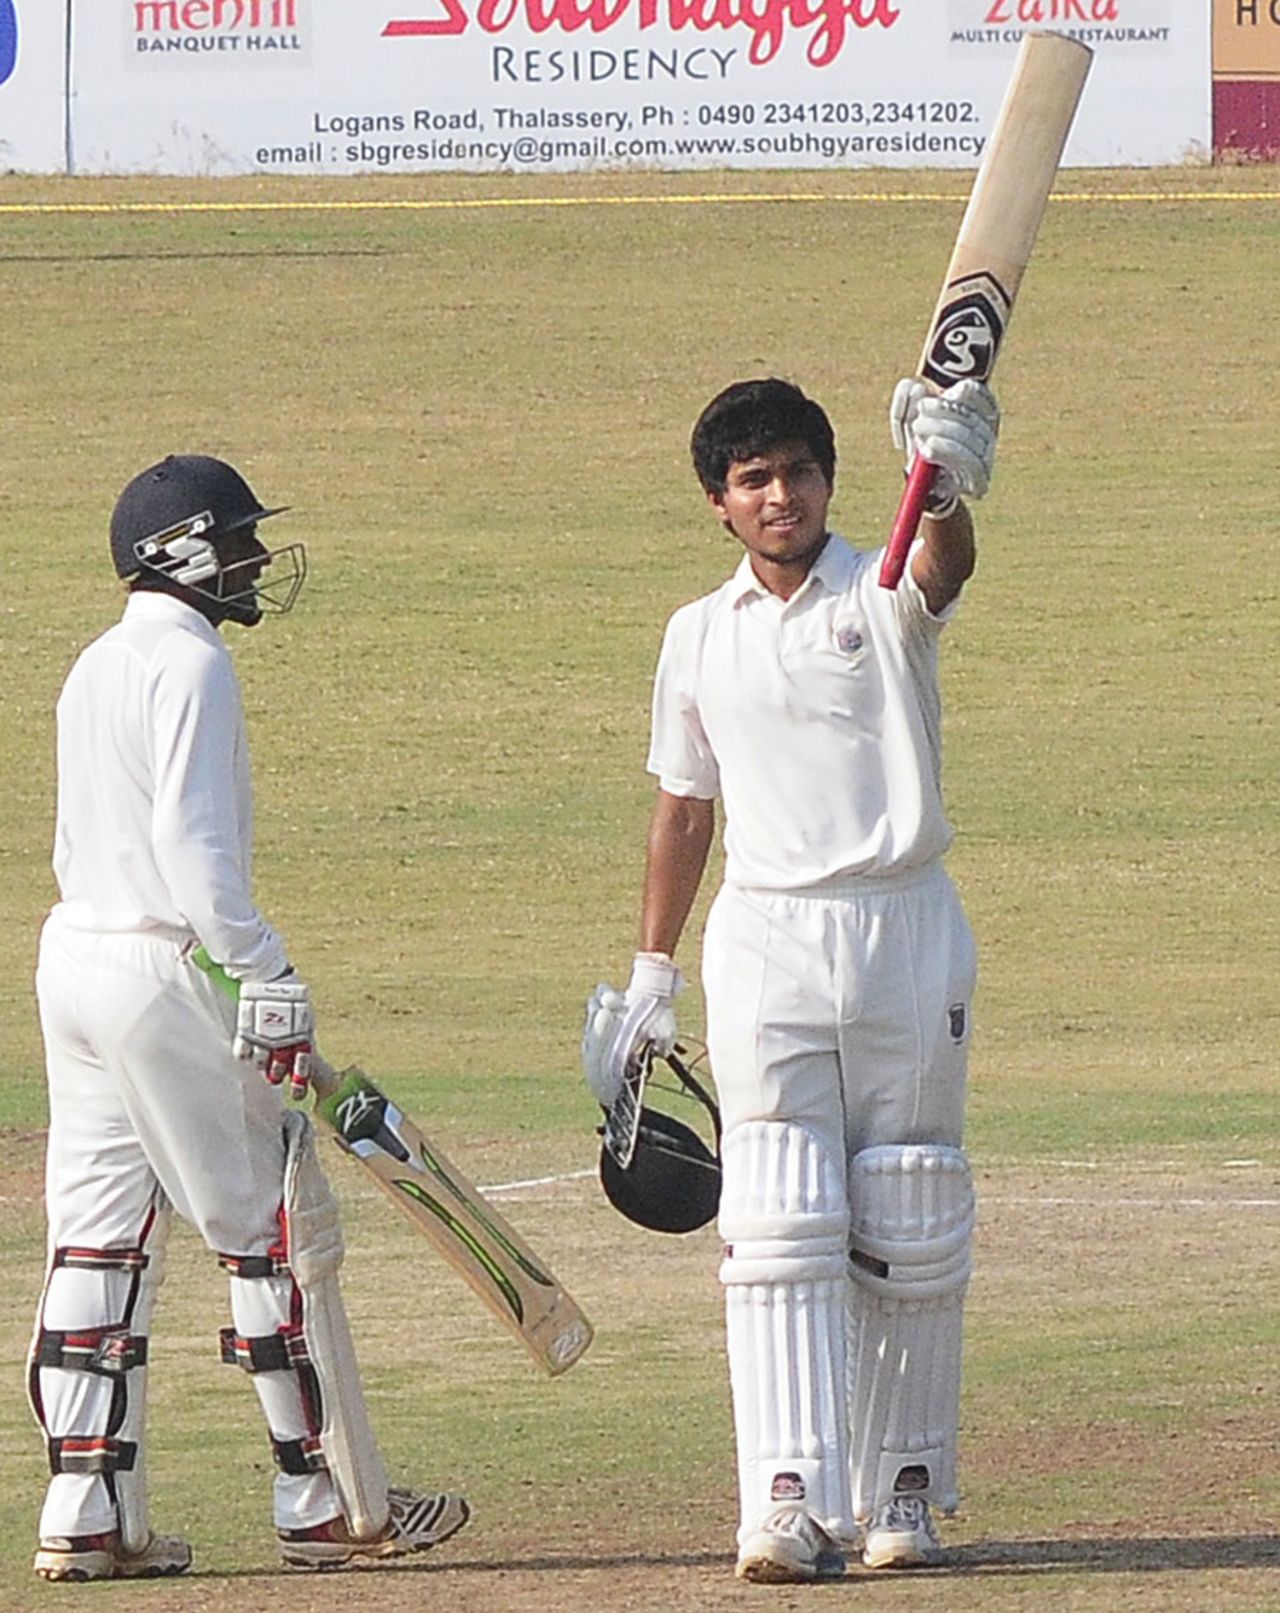 Akshay Darekar is pleased after scoring a maiden first-class fifty, Kerala v Maharashtra, Ranji Trophy 2013-14, Group C, 2nd day, Kannur, December 15, 2013